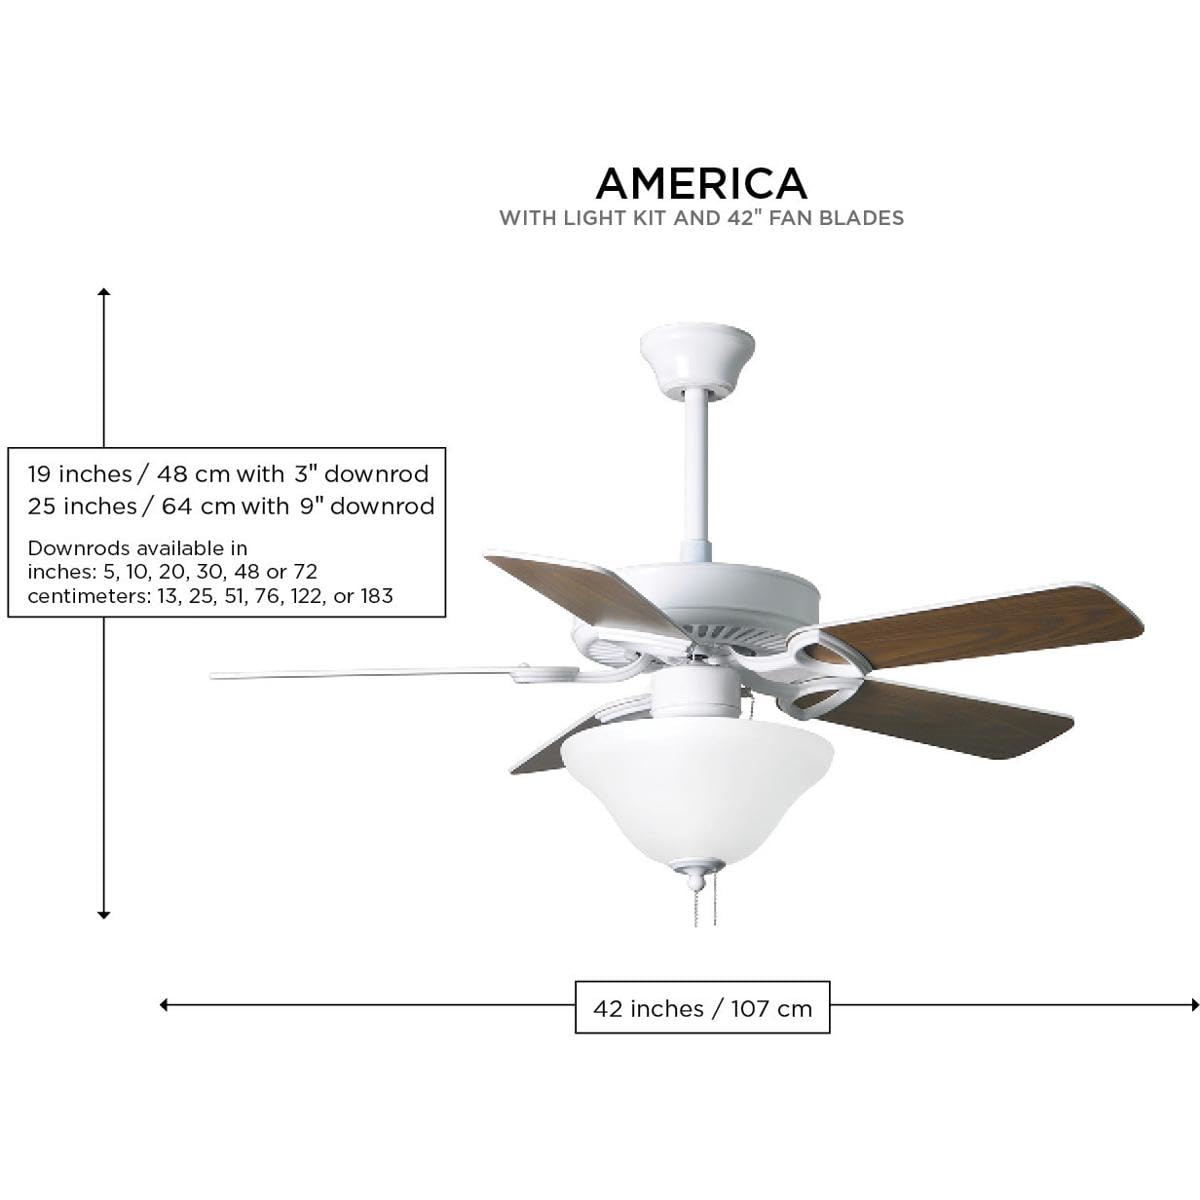 Matthews Fan AM-TW-WH-42 America 3-speed ceiling fan in gloss white finish with 42" white blades. Made in Taiwan